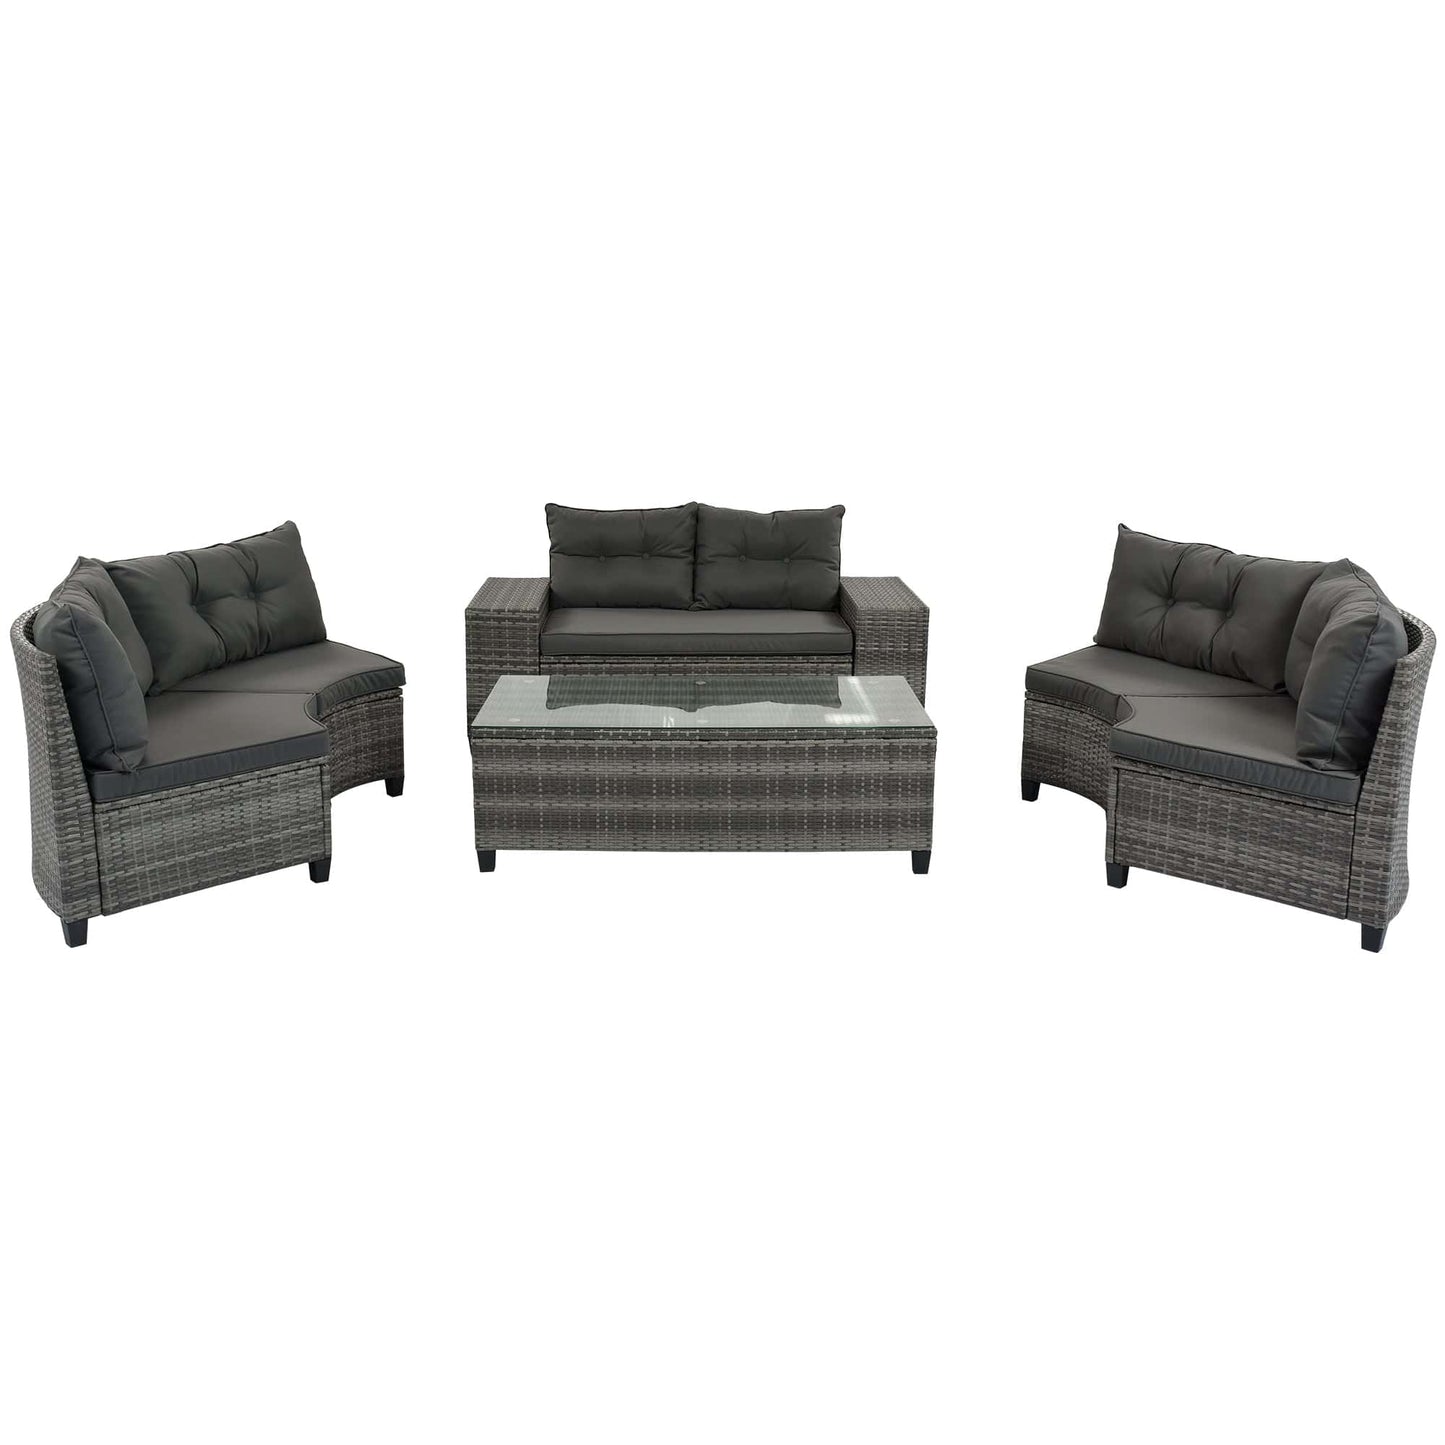 1st Choice Furniture Direct Outdoor Sofa 1sr Choice Curve Outdoor Wicker Sofa Set with Water-resistant Cushions